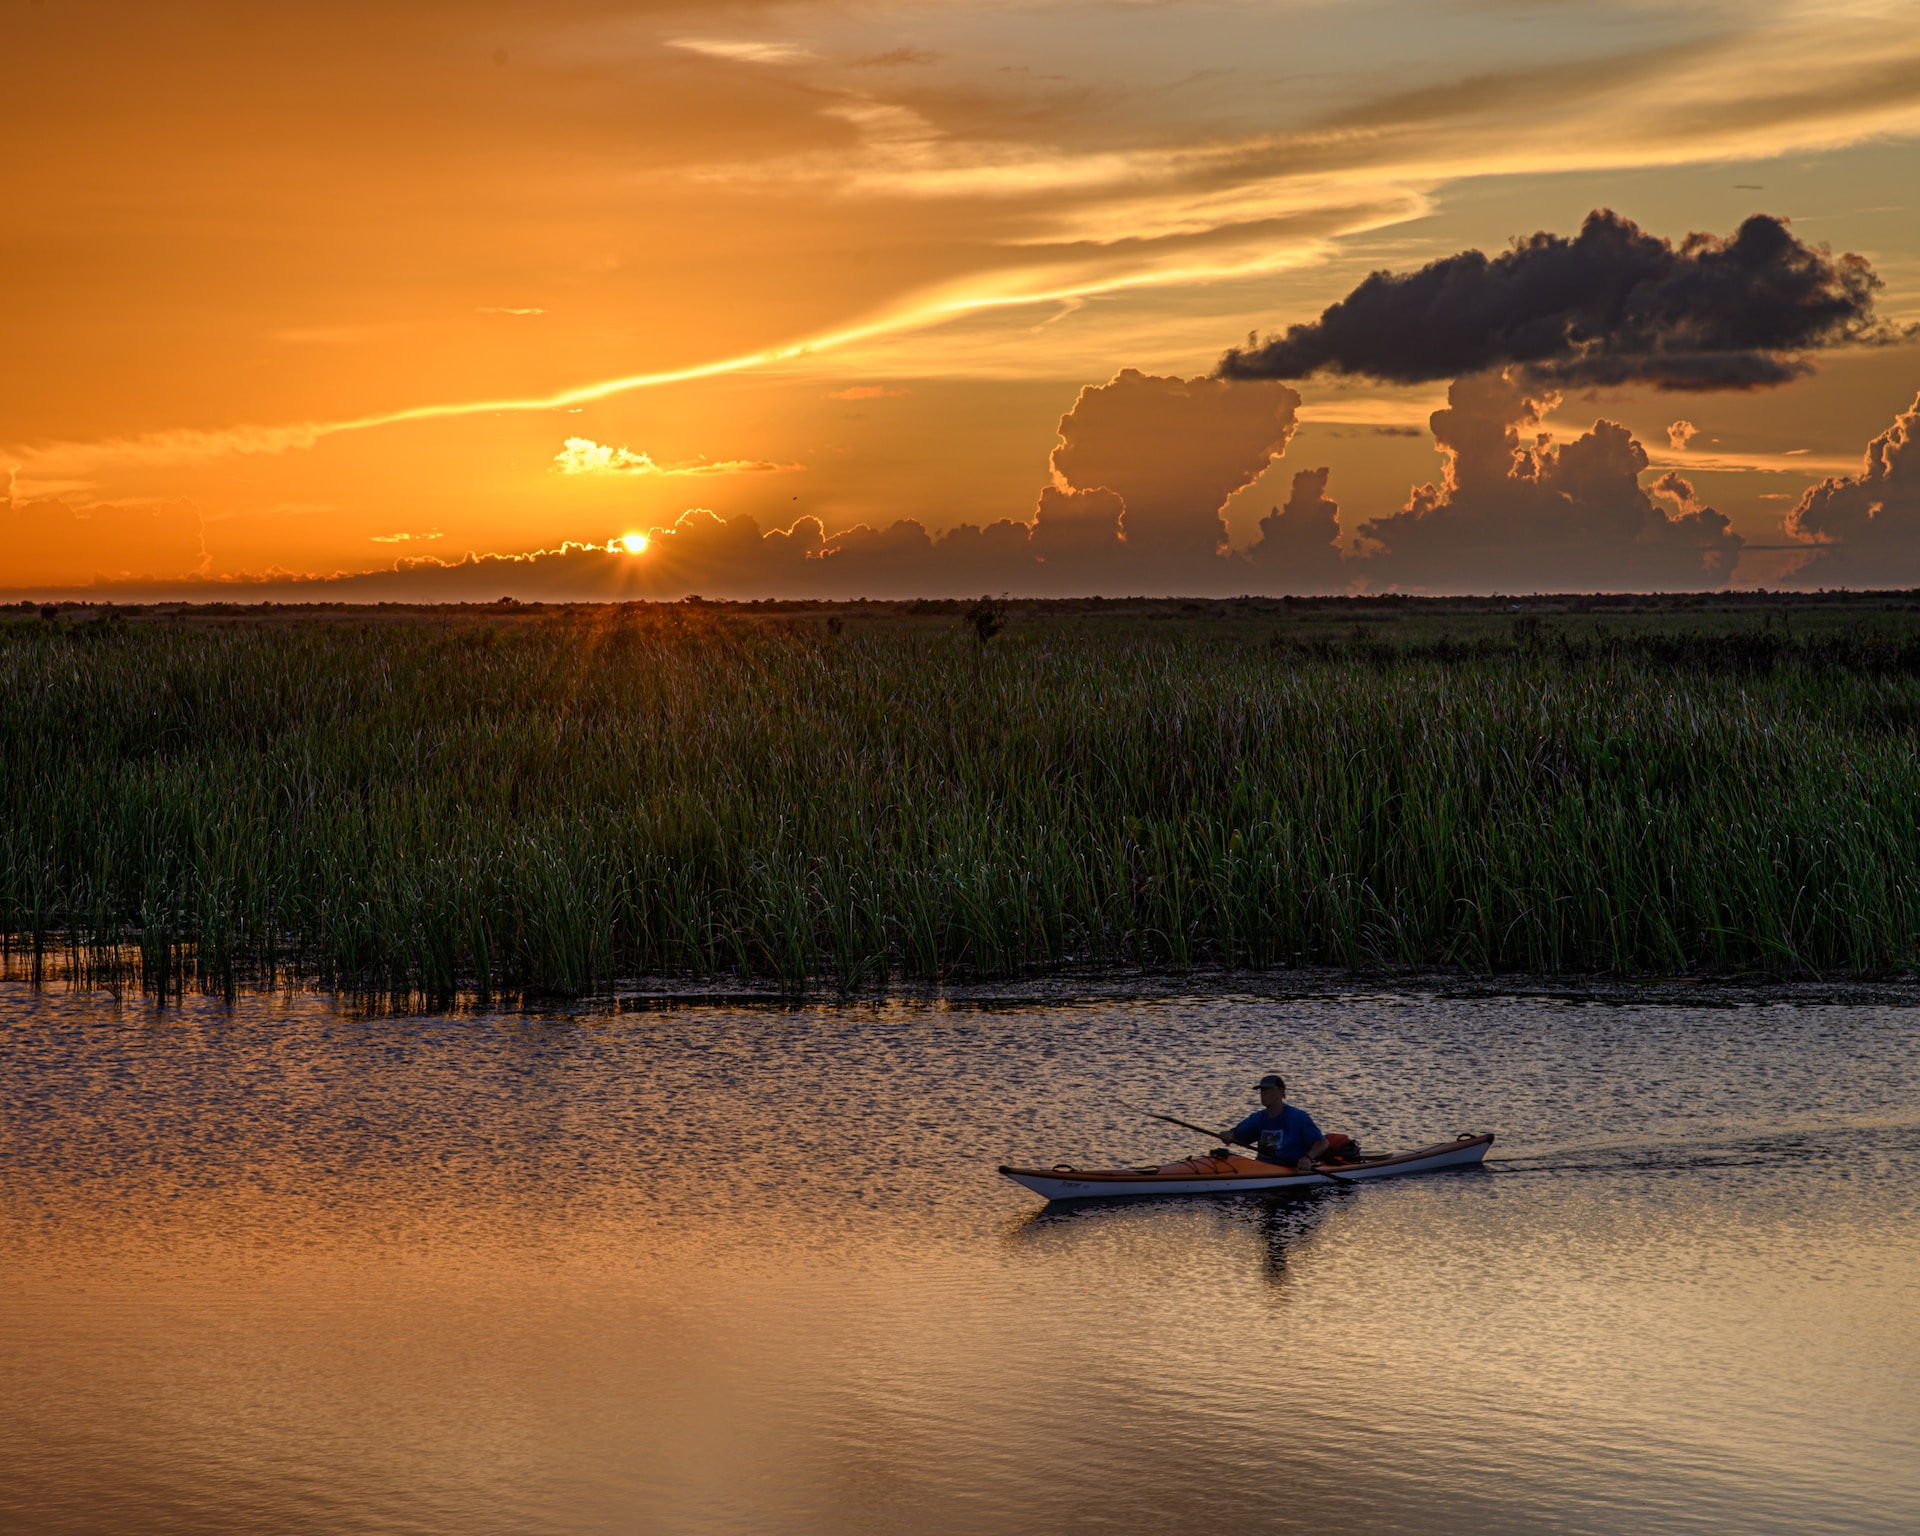 A man kayaking in Everglades with an onset of a sunset.